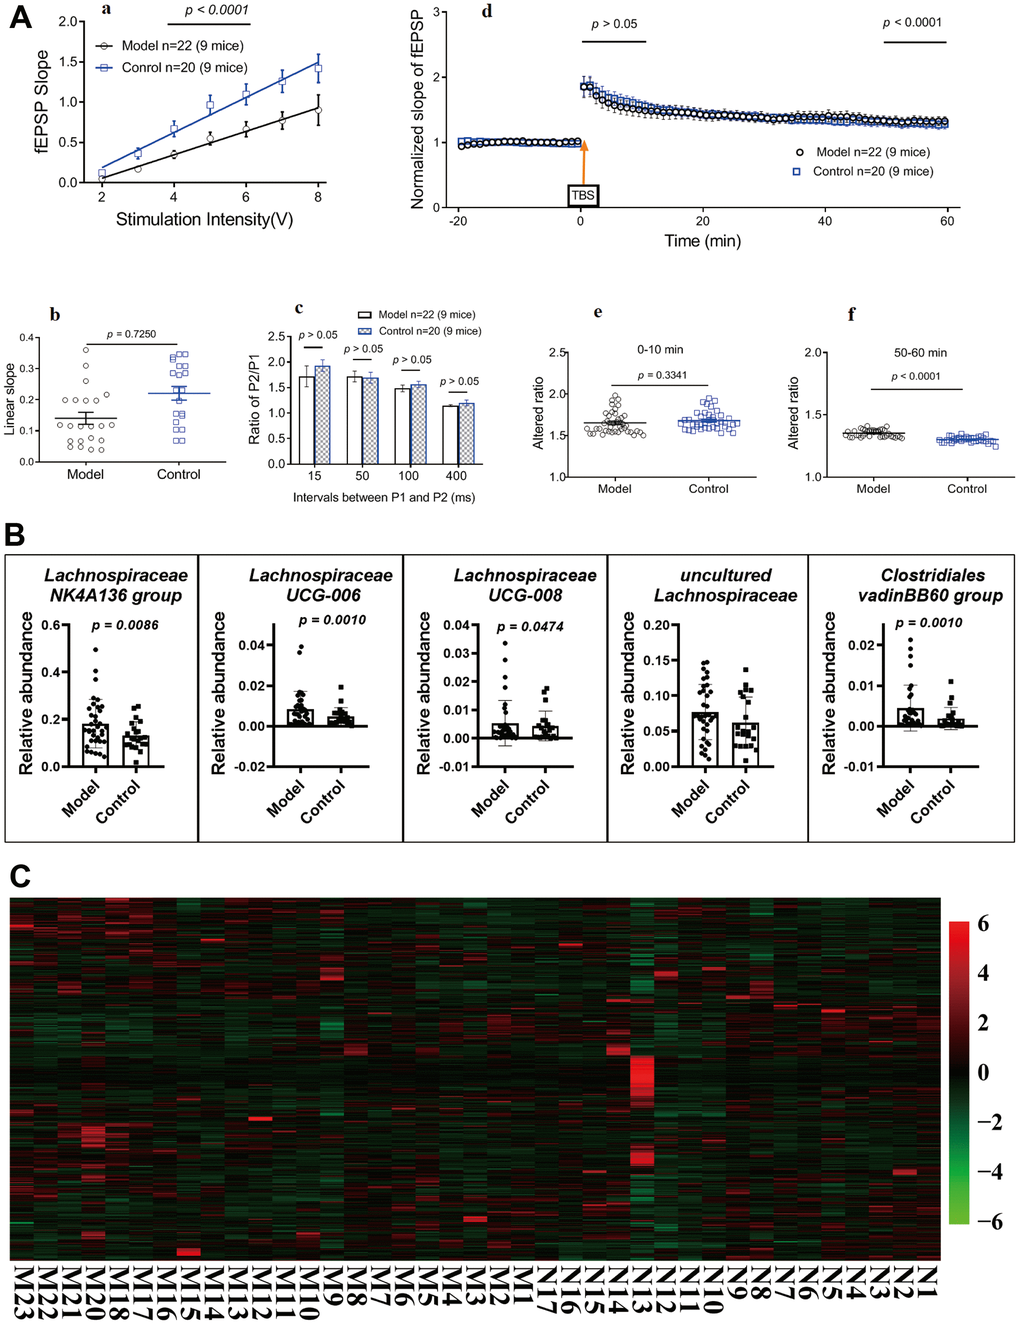 Influences of maternal high sugar and fat diet on LTP, gut microbiota and metabolome of older mice. (A) LTP in hippocampal slices, 16 months later, subsets of mice were randomly selected to perform standard field potential recordings. (B) Changes on the gut microbiota; (C) Changes on the metabolome in fimo. The pathological structure of brain and small intestine (Supplementary Figure 5). Data are presented as the means ± SD of more than 6 independent experiments. Significant differences between two groups of LTP were evaluated by two-tailed unpaired Student’s t-tests or two-tailed Welch’s t-test. Significant differences between treatments were analyzed by one-way analysis of variance (ANOVA) at p 